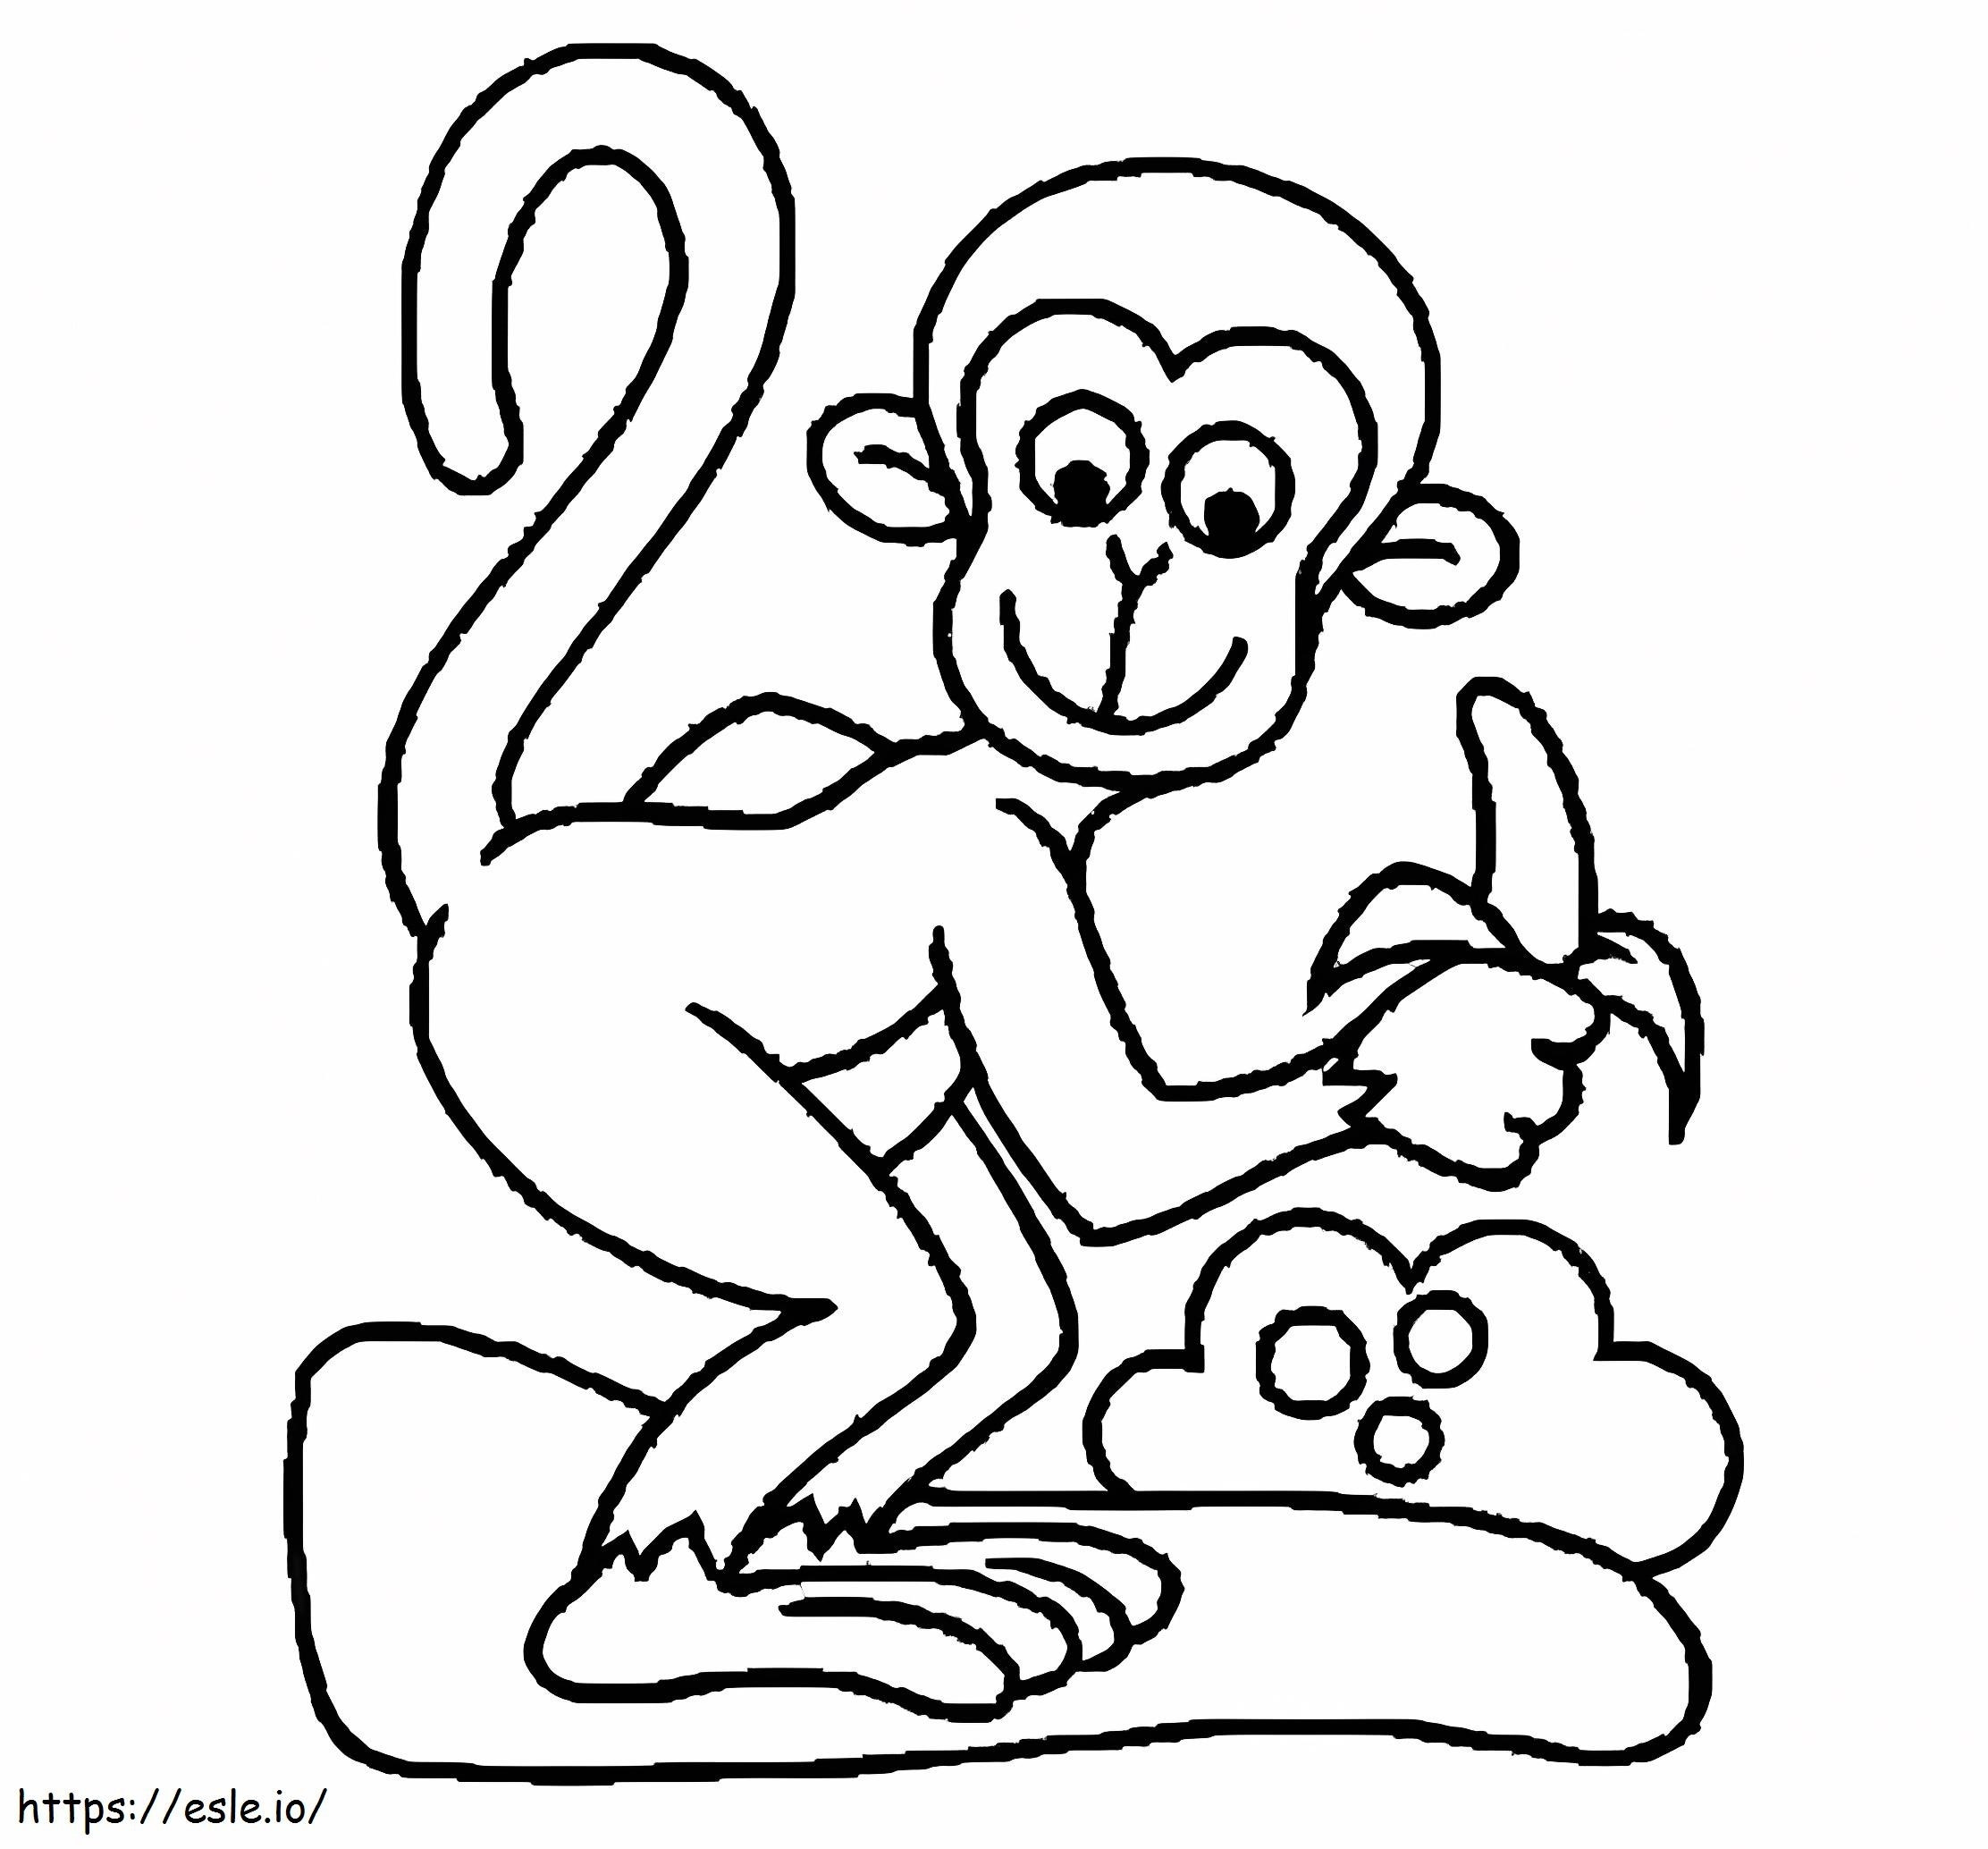 Monkey Smiling coloring page